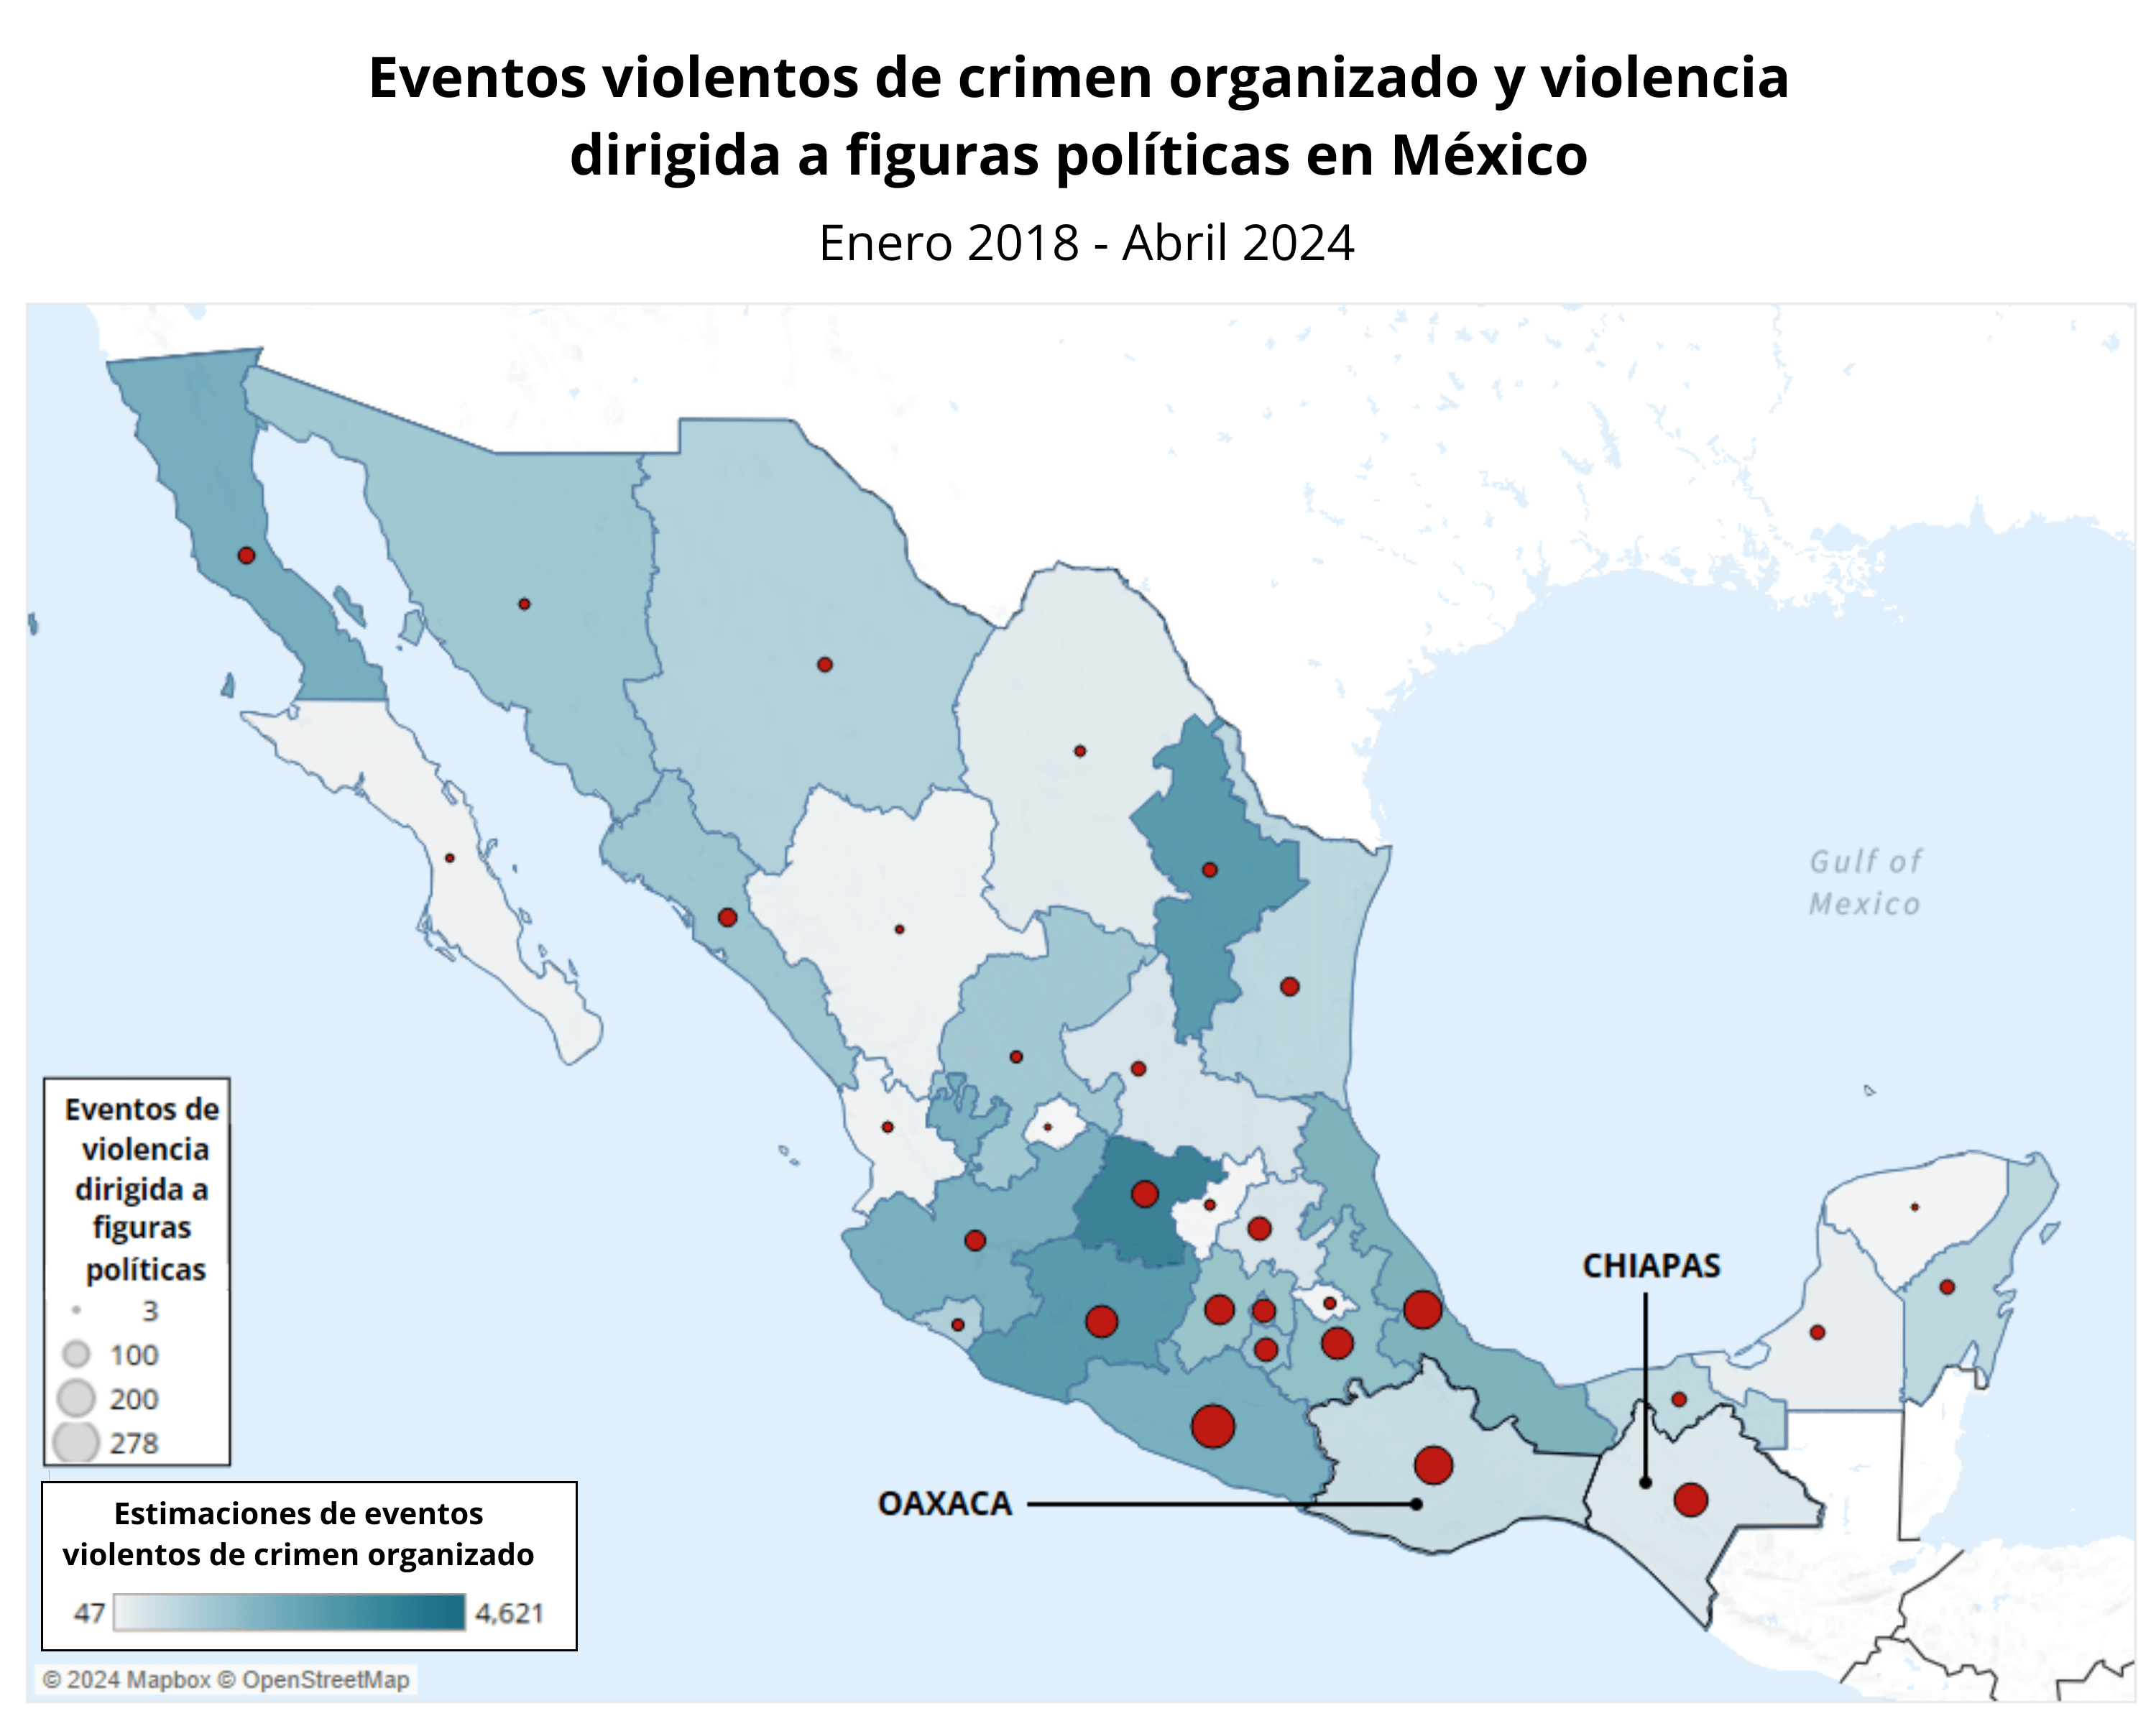 Map - Gang Violence and targeting of political figures in Mexico - January 2018 to April 2024 - Spanish